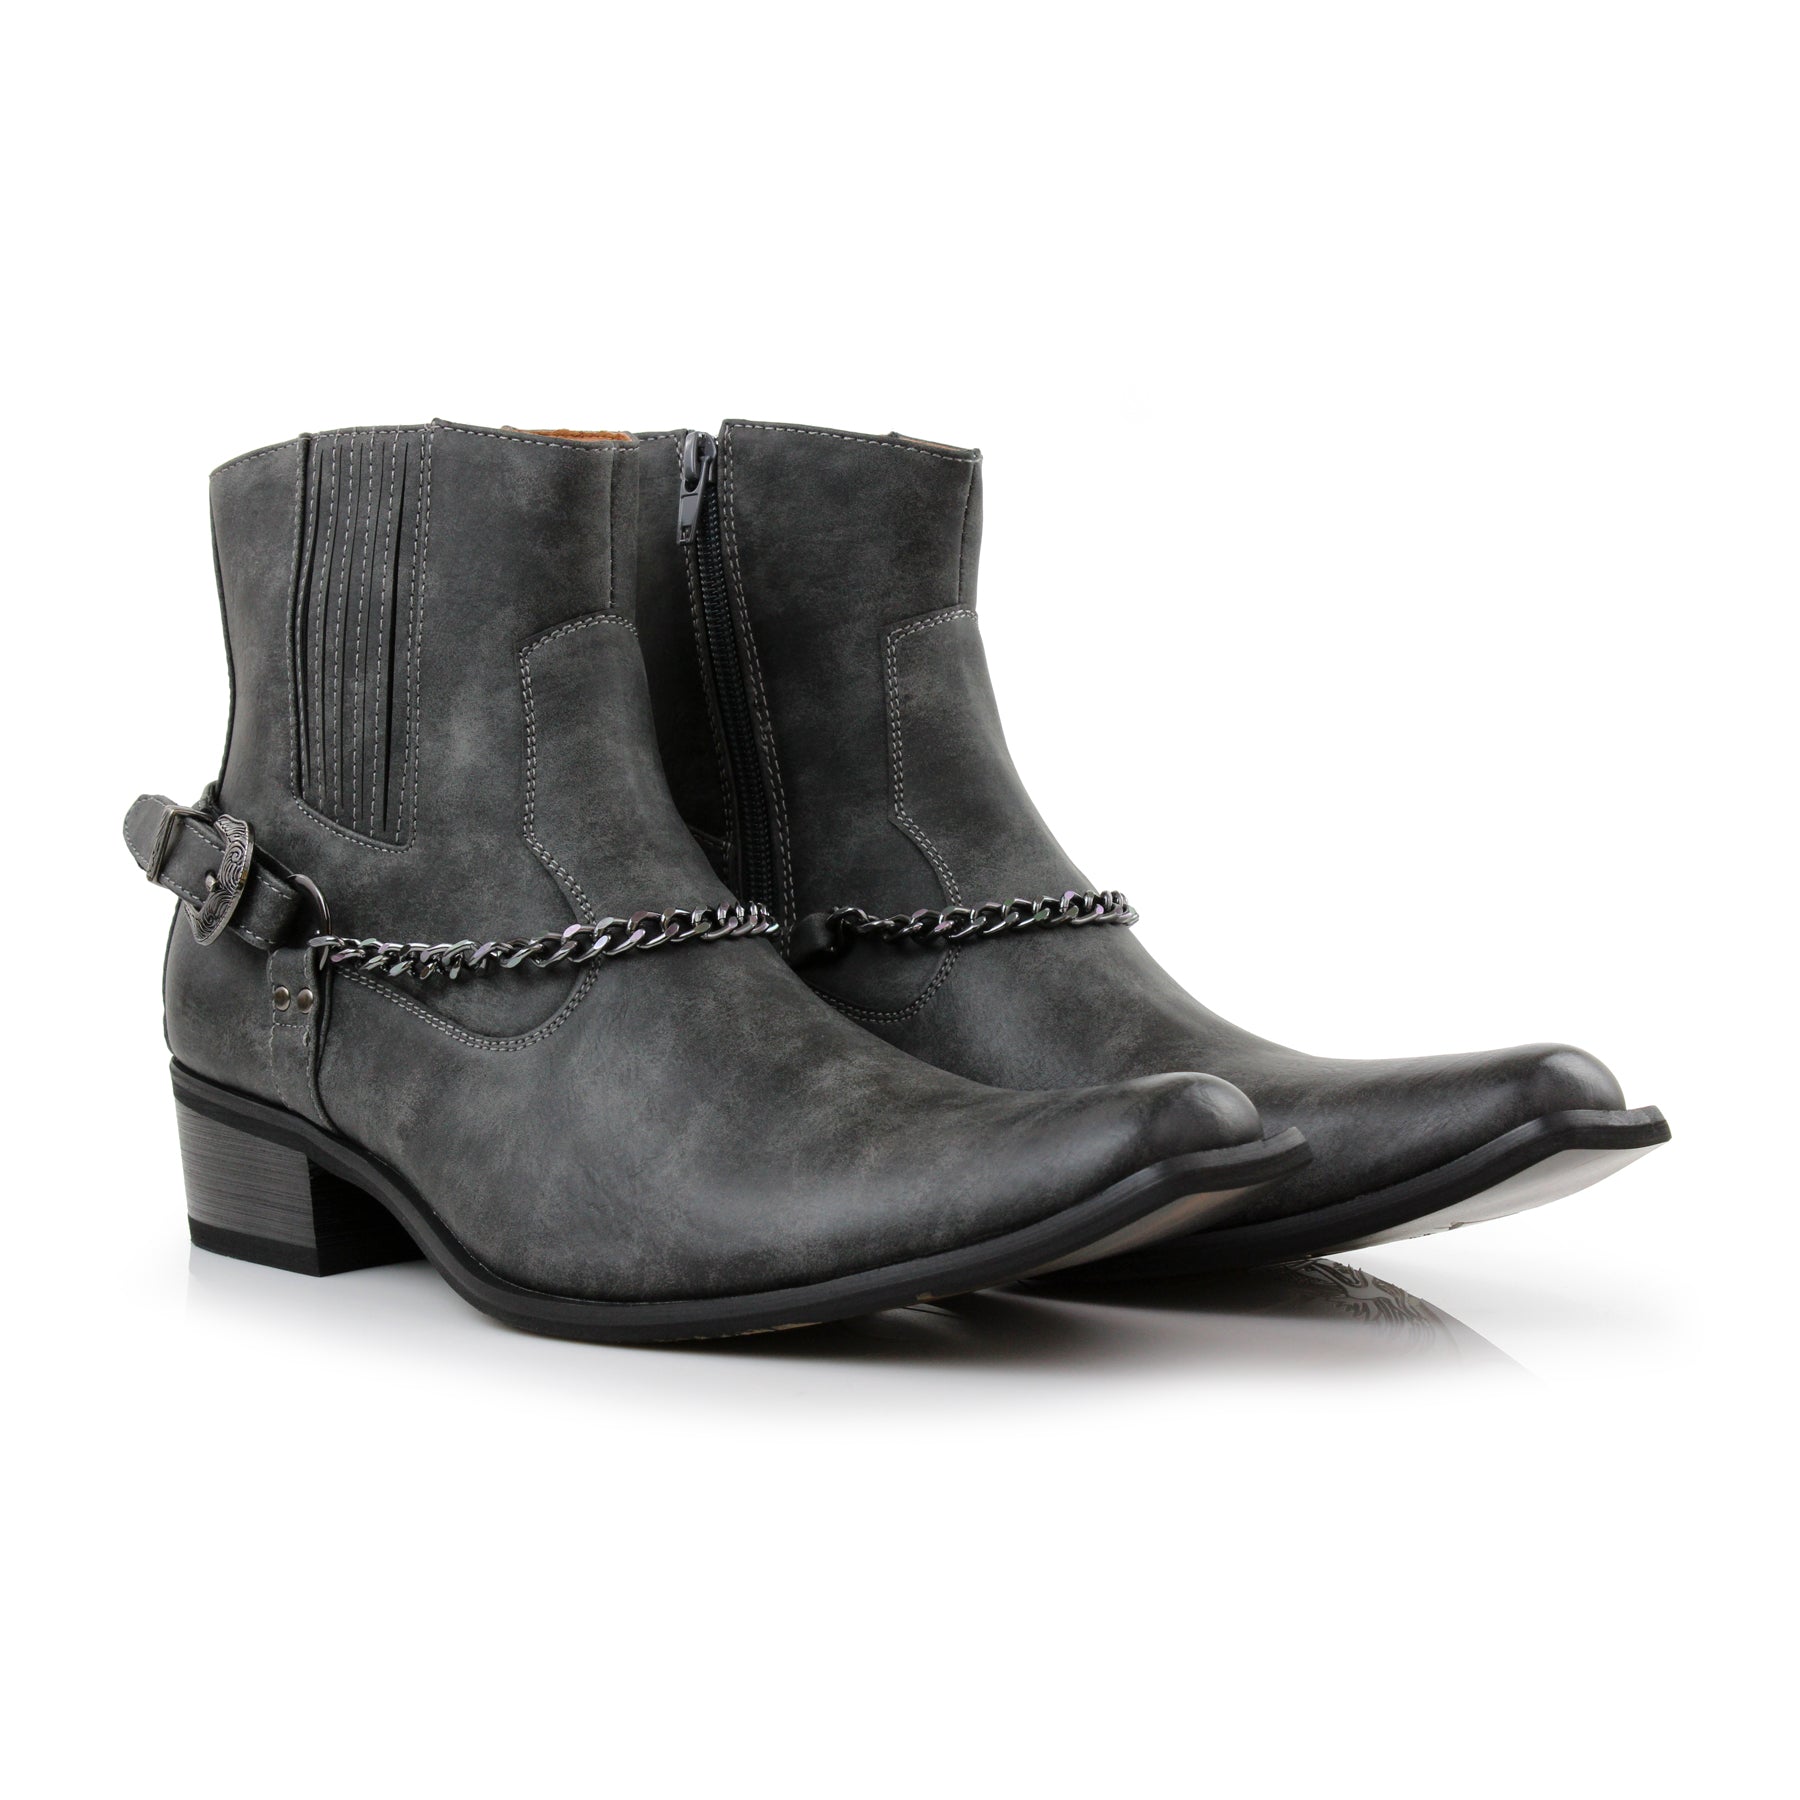 Faux Leather Cowboy Boots | Reyes by Ferro Aldo | Conal Footwear | Paired Angle View